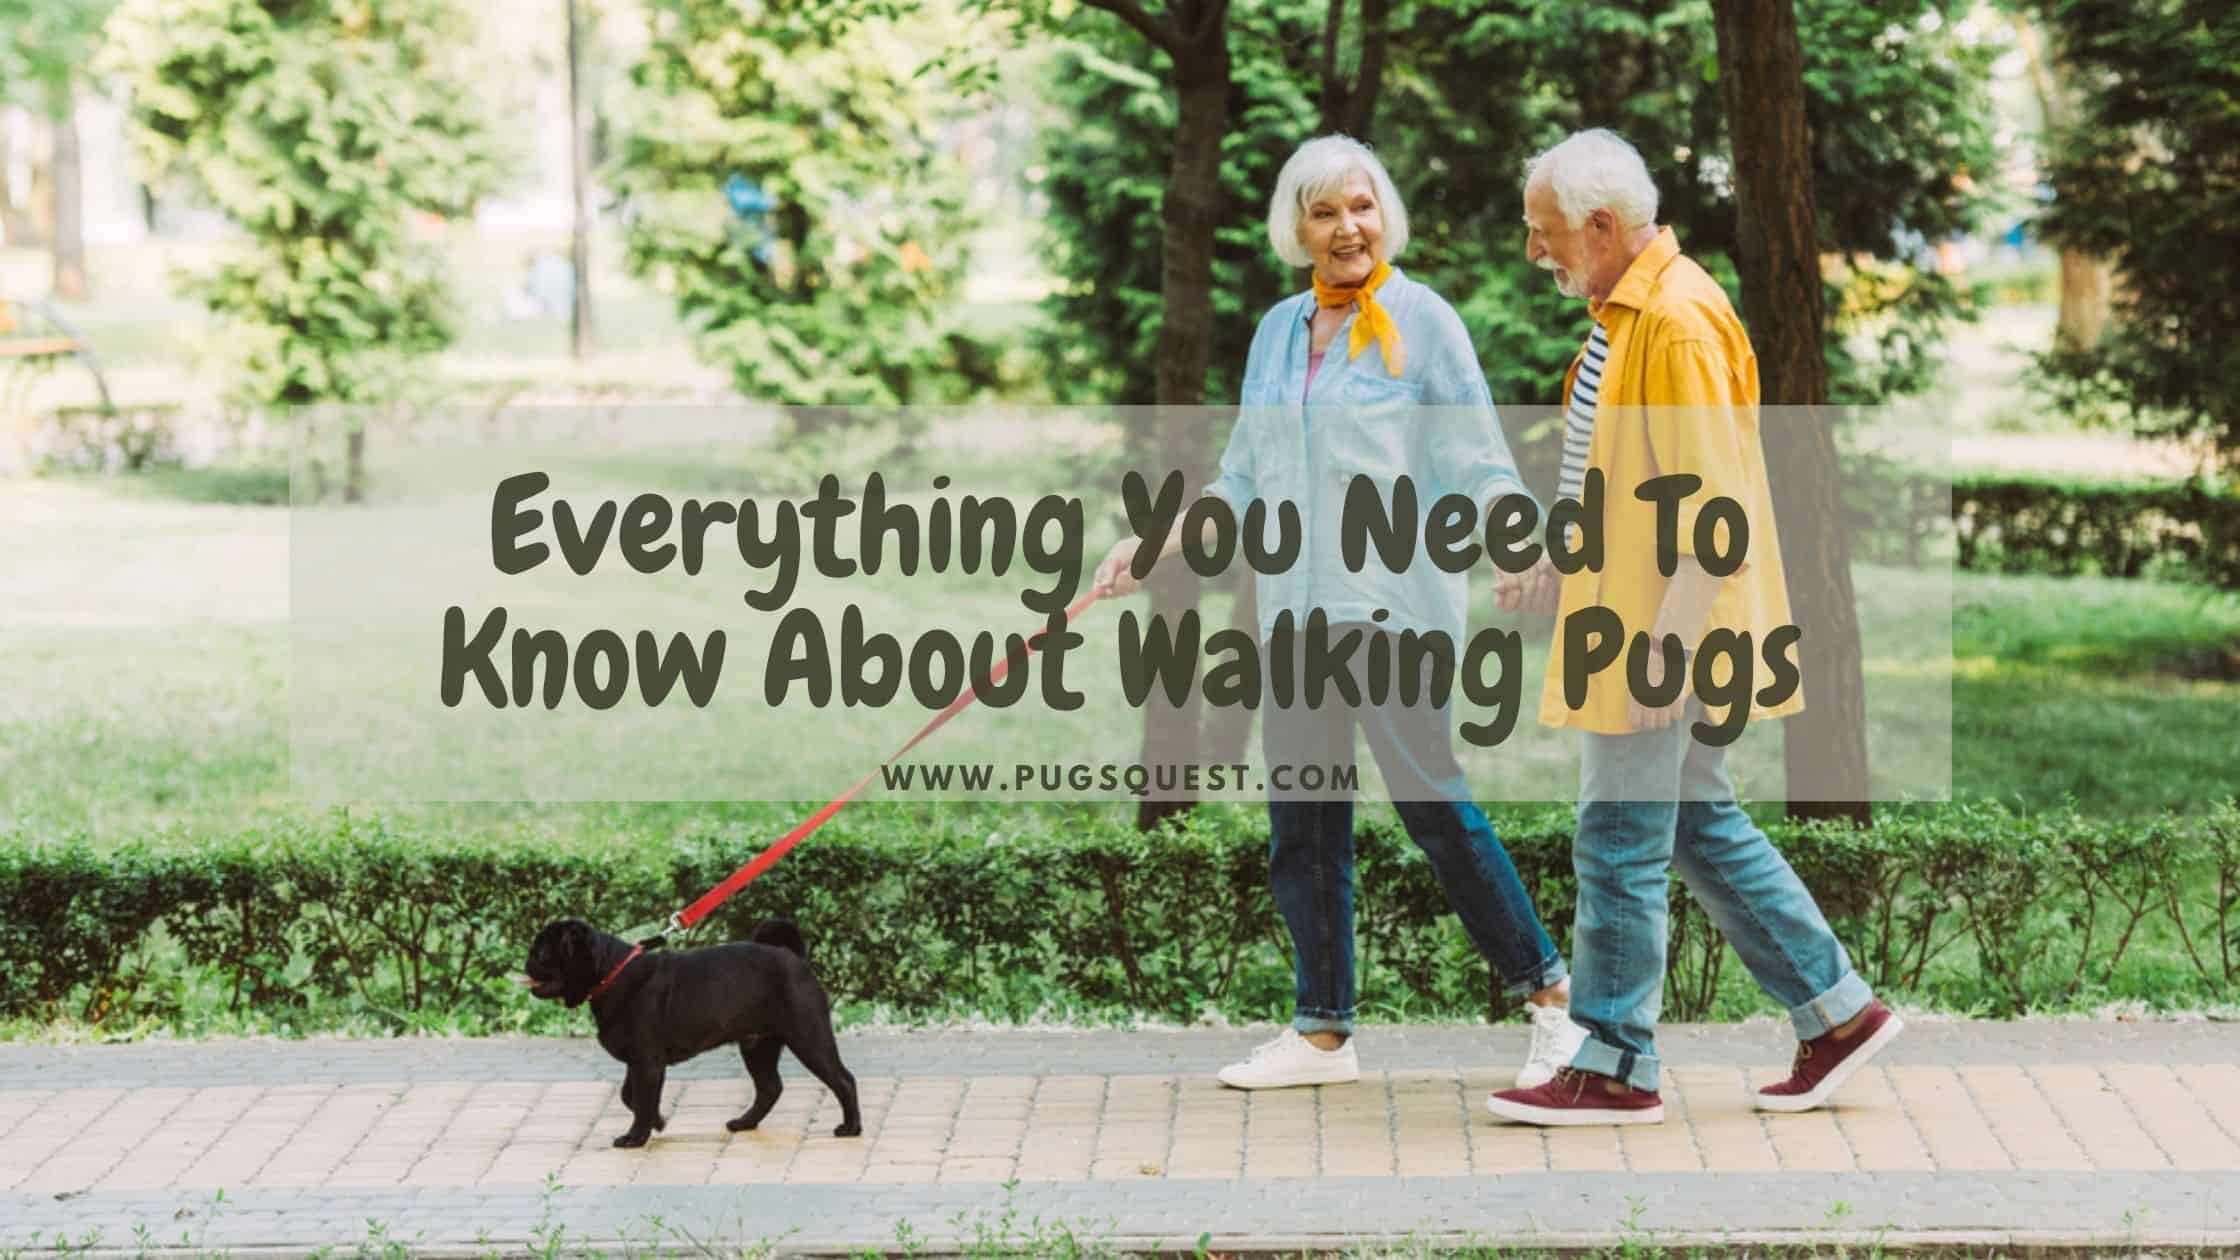 Everything You Need To Know About Walking Pugs